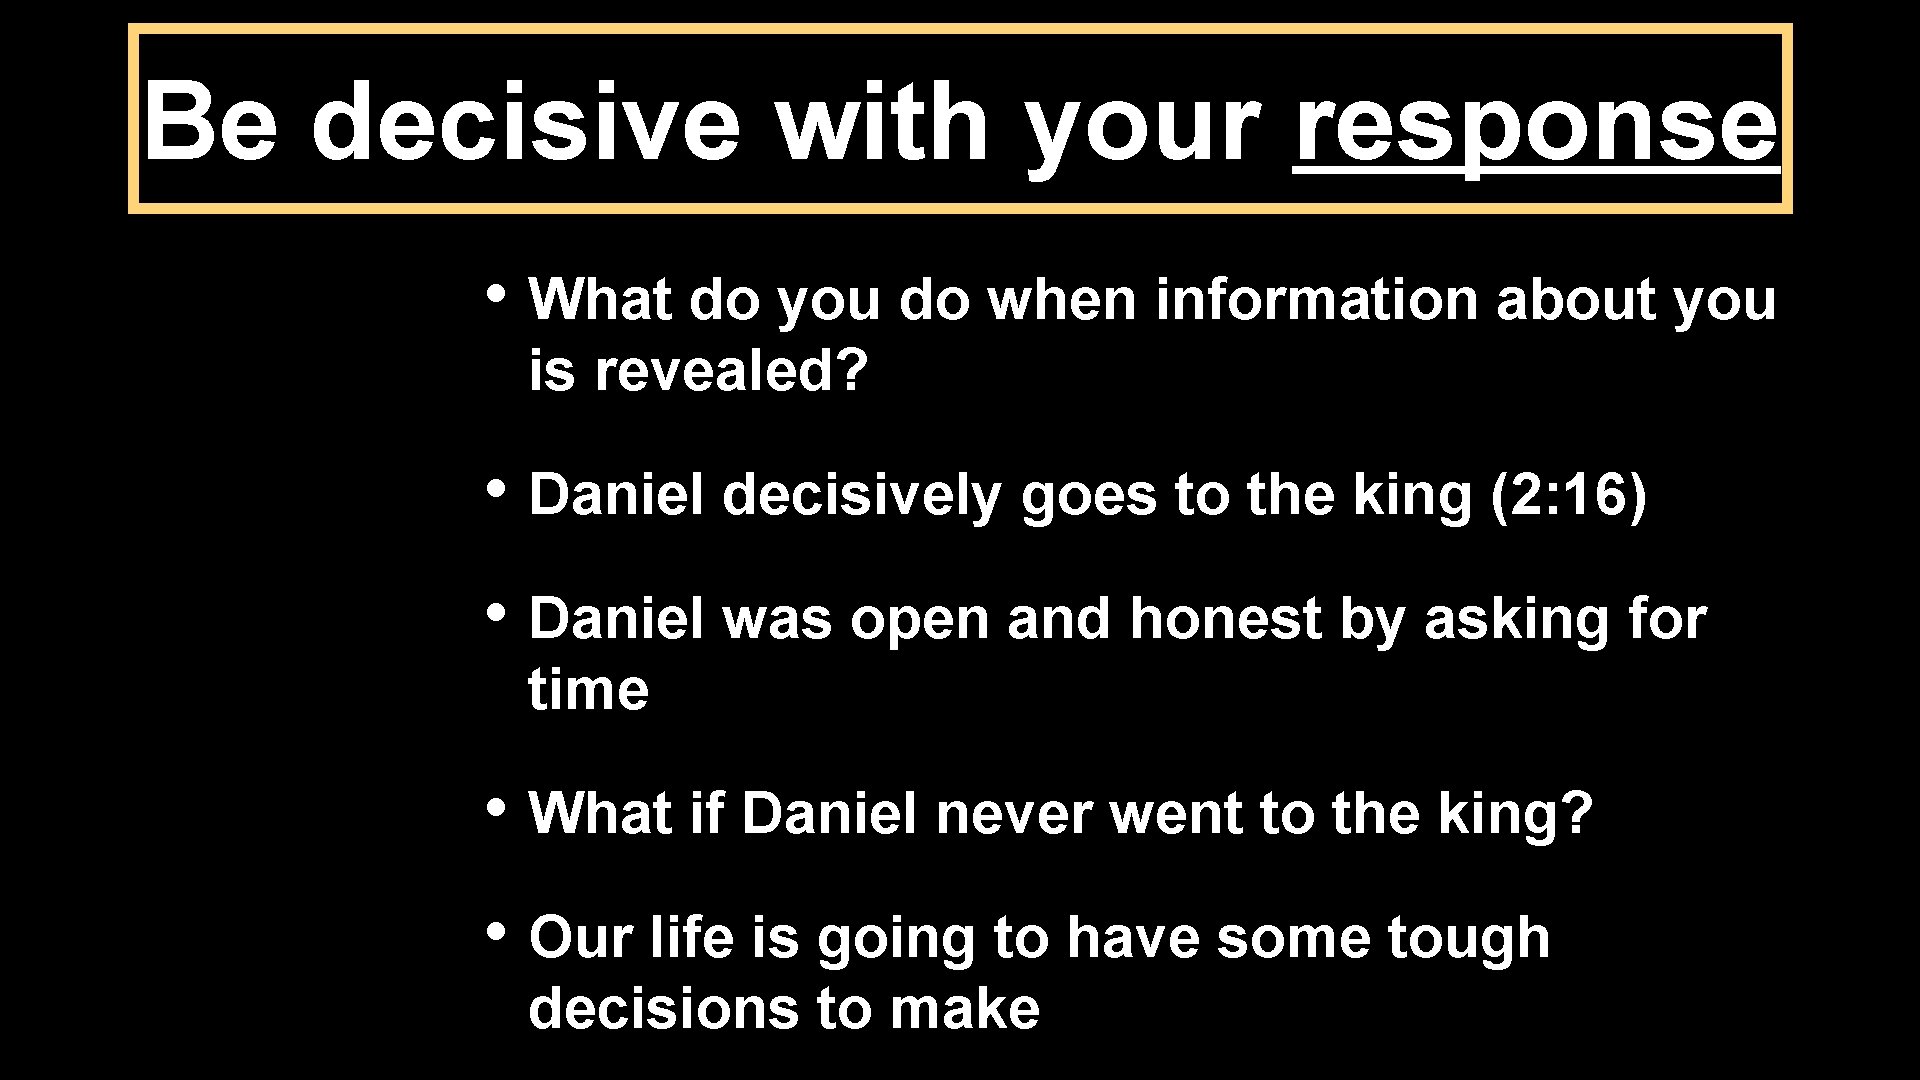 Be decisive with your response • What do you do when information about you